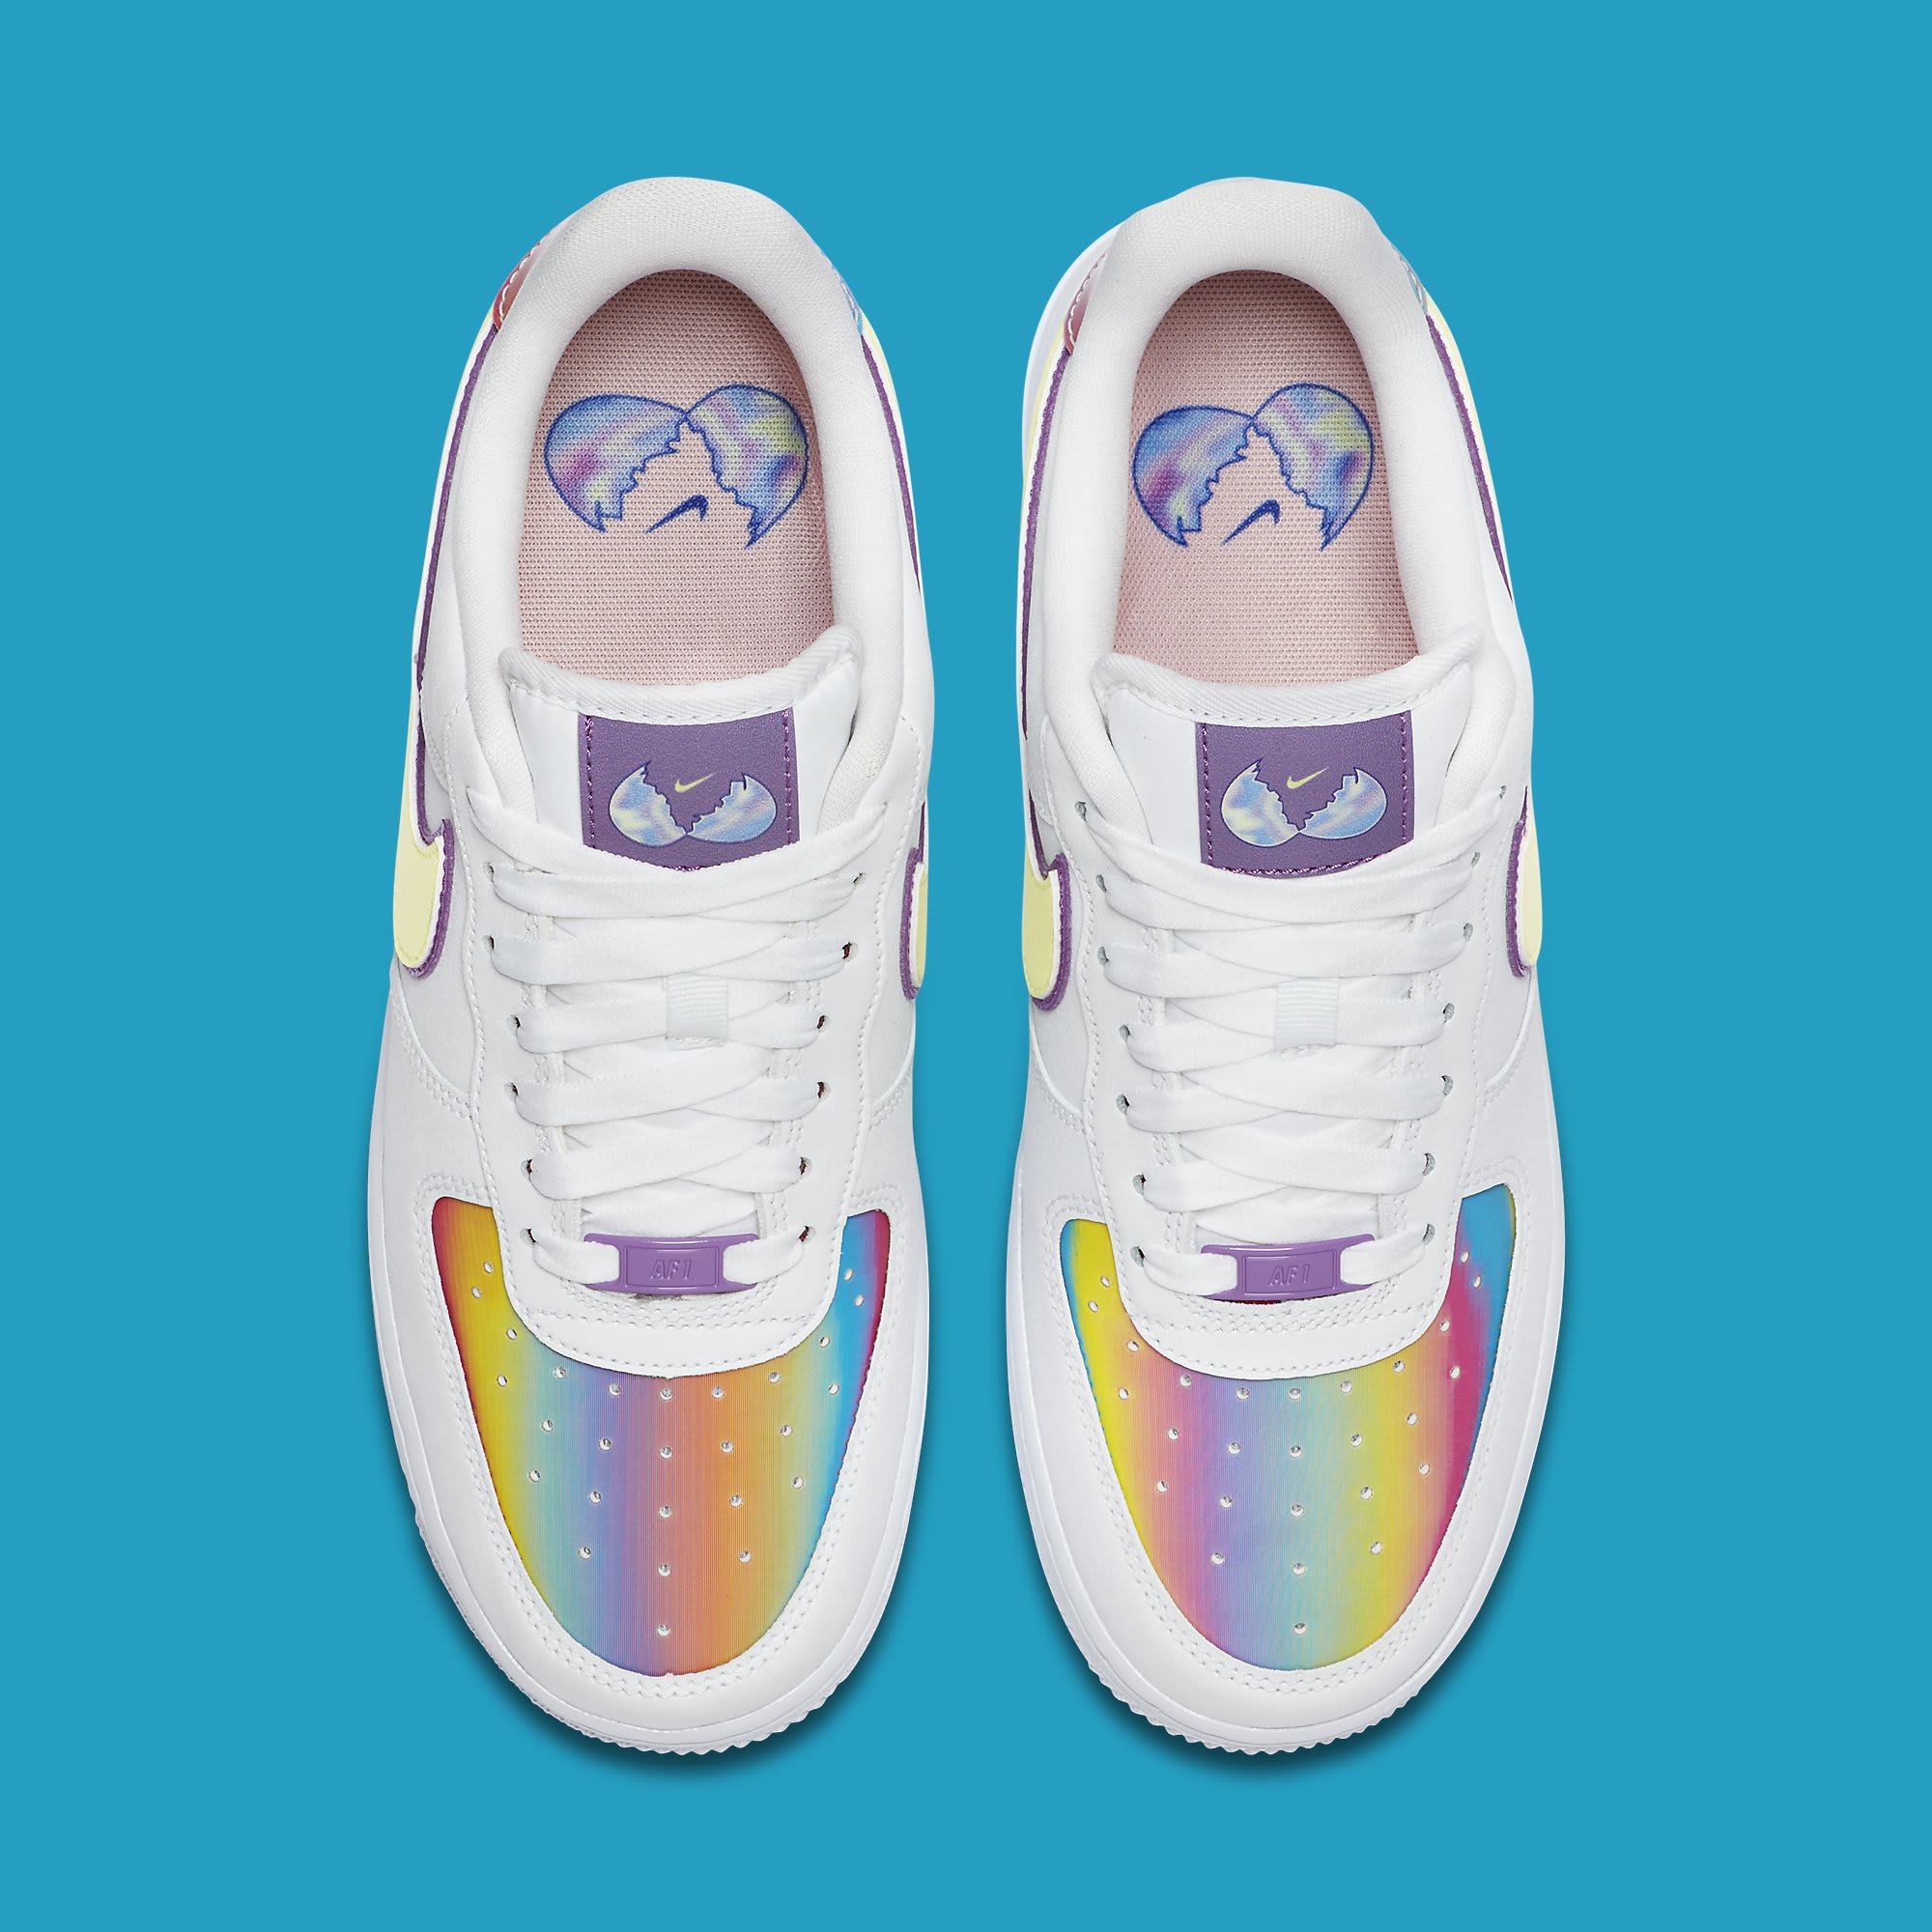 nike air force 1 low easter stores